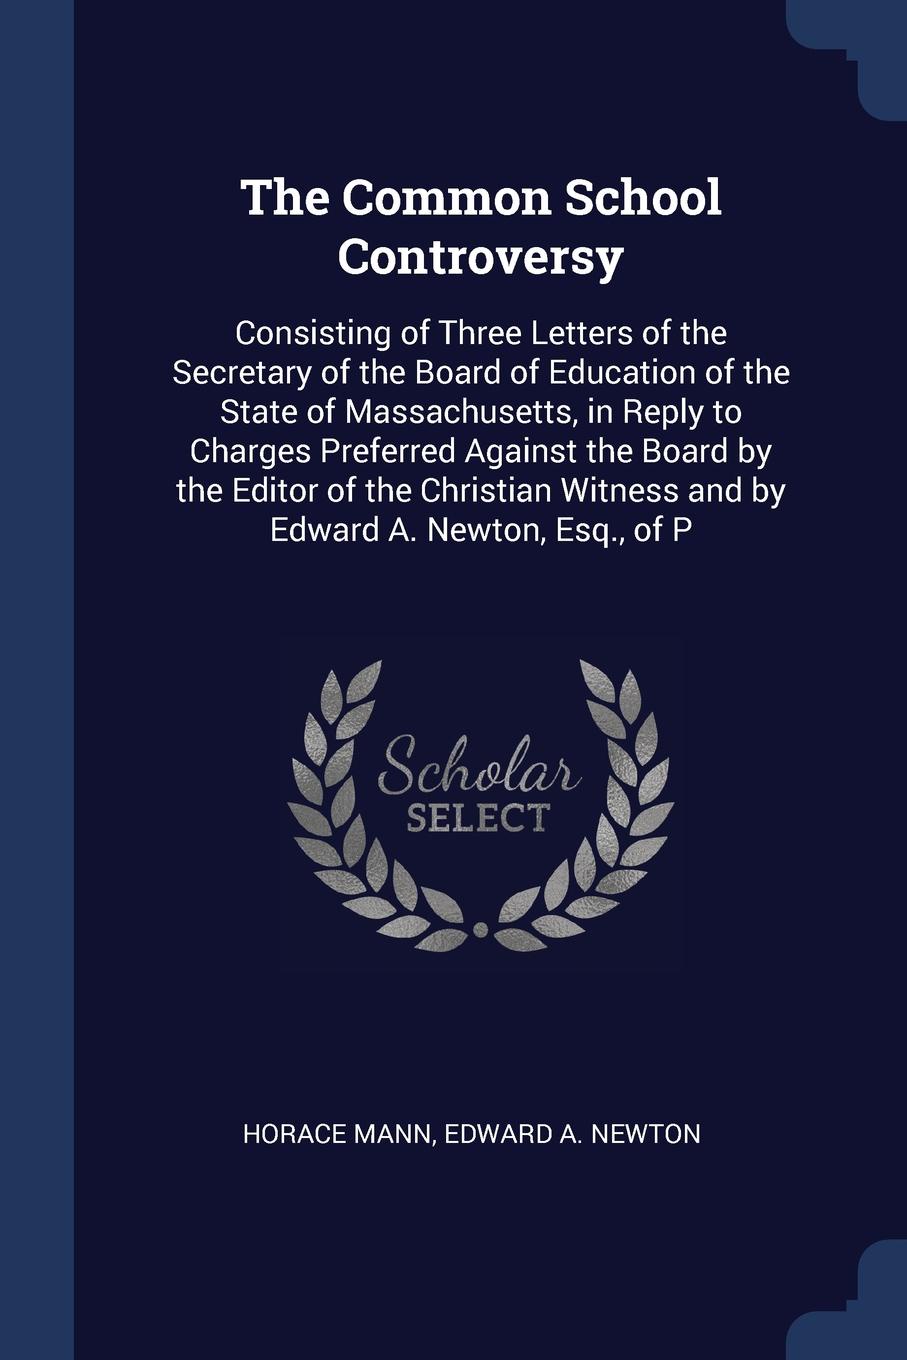 The Common School Controversy. Consisting of Three Letters of the Secretary of the Board of Education of the State of Massachusetts, in Reply to Charges Preferred Against the Board by the Editor of the Christian Witness and by Edward A. Newton, Es...